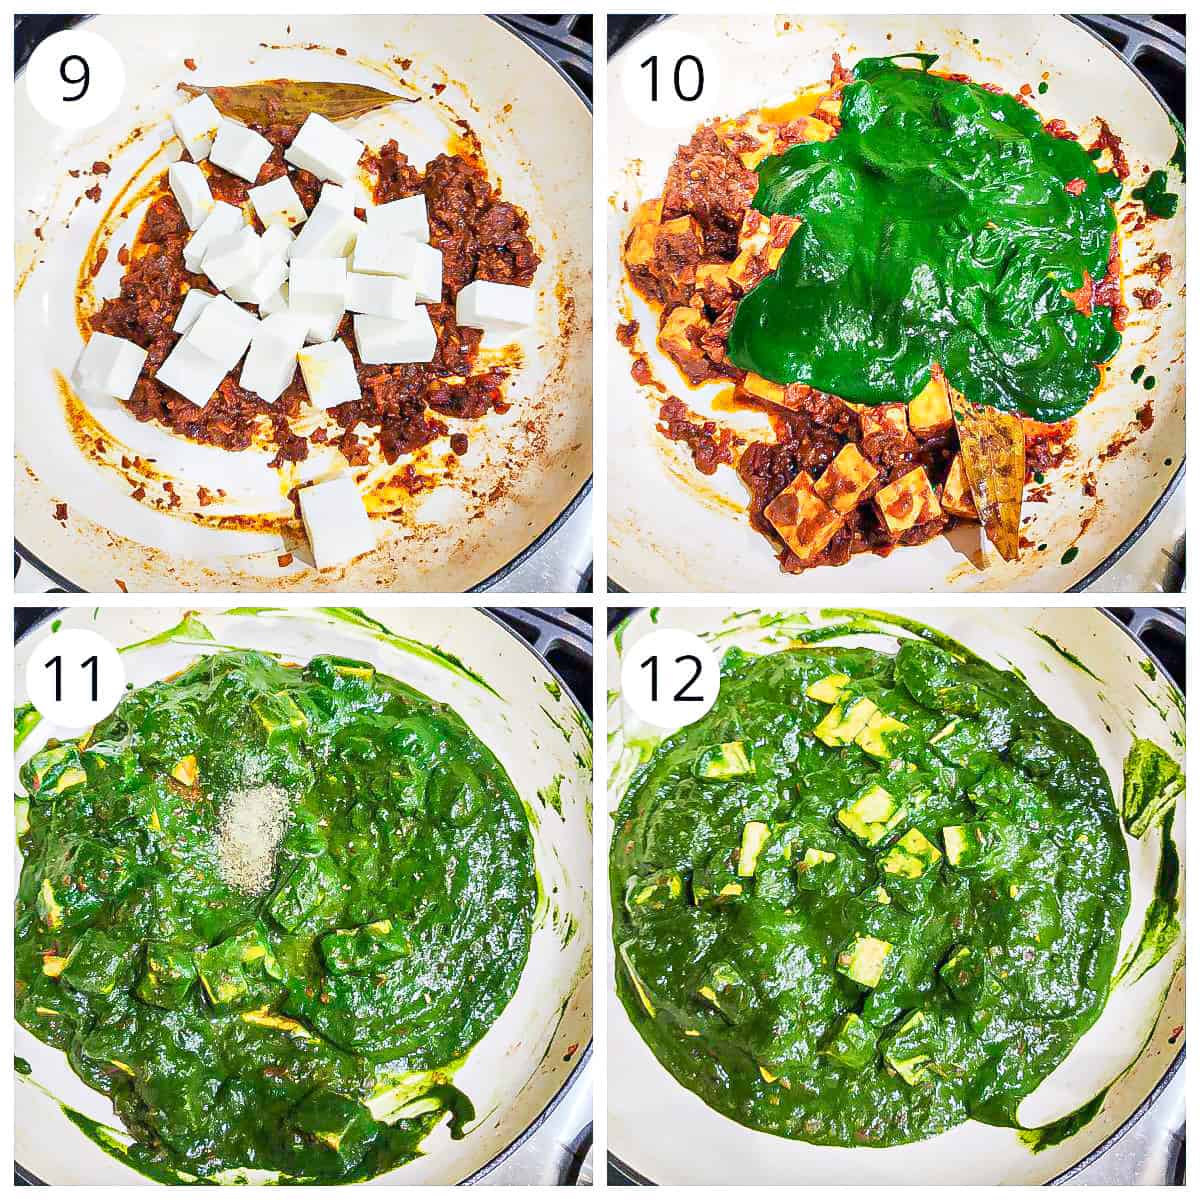 Steps for making Palak paneer on Stovetop